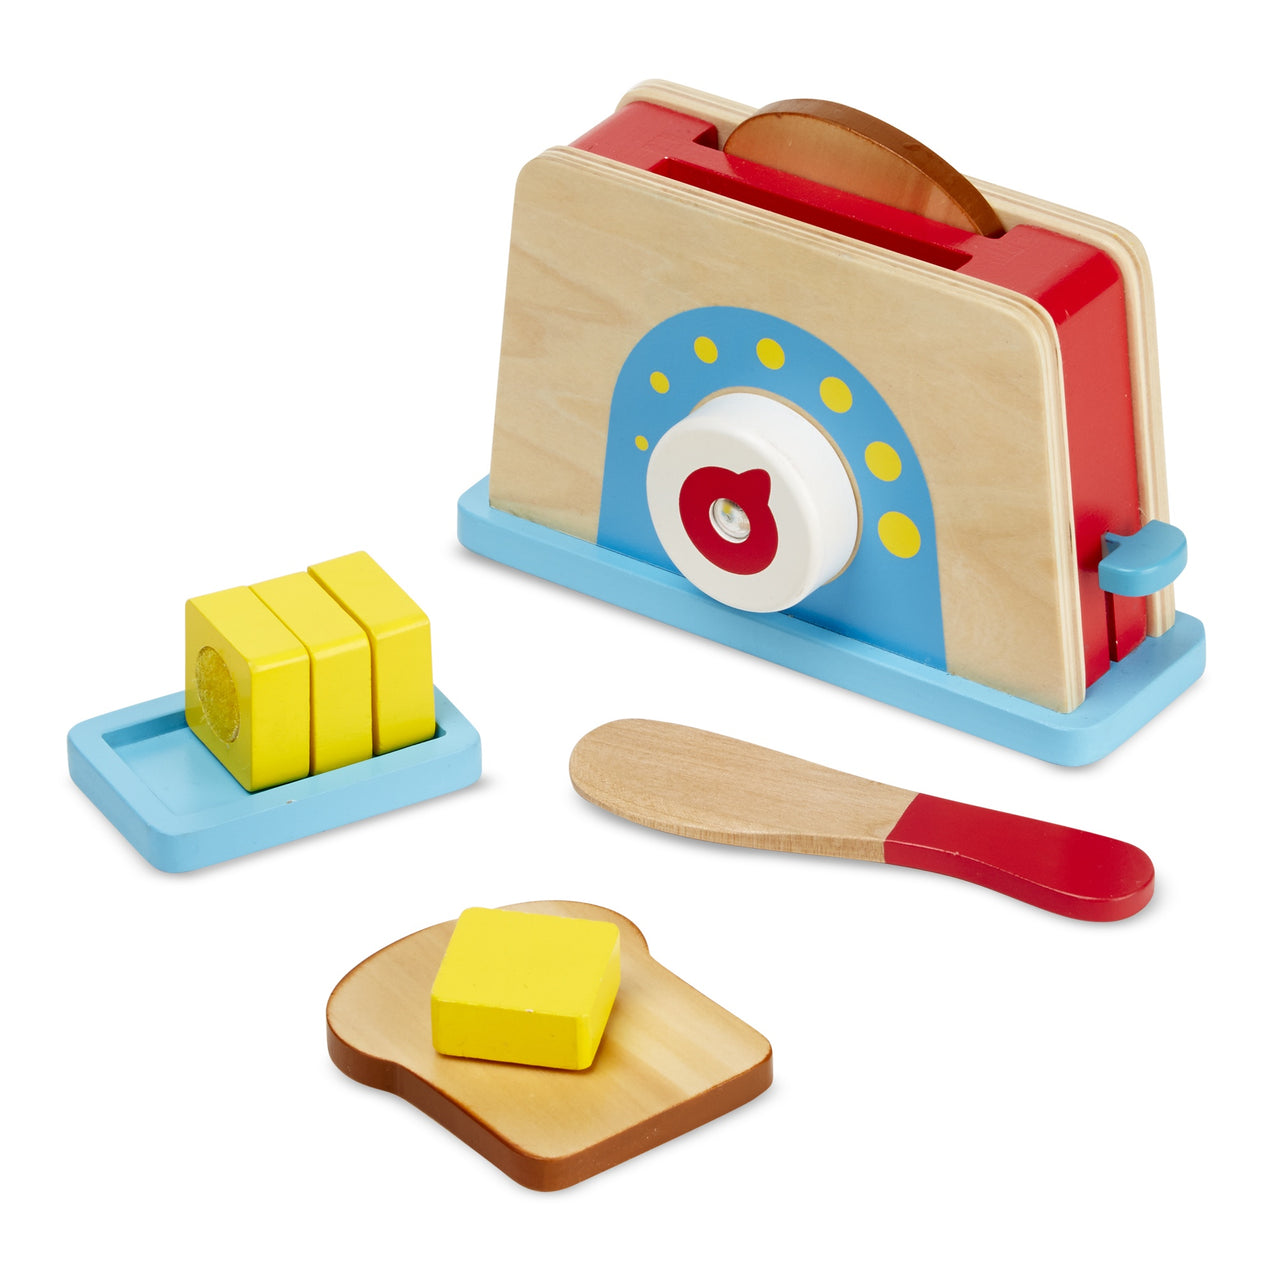 Melissa & Doug Wooden Bread and Butter Toast Set